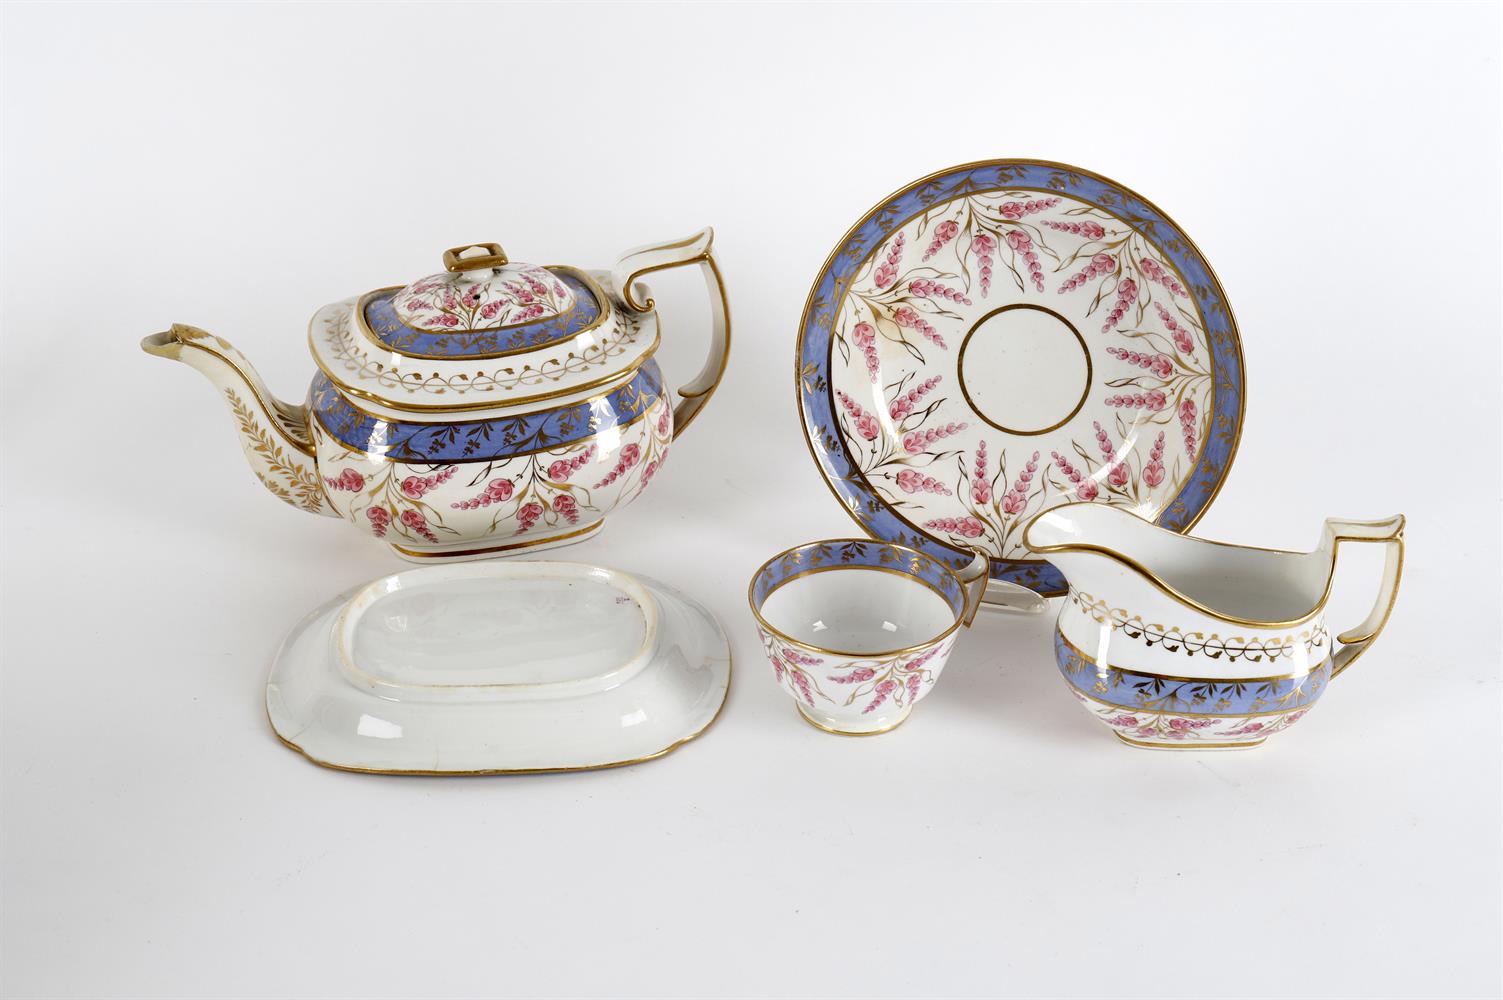 Early 19th century English teaware to include a Chamberlain's Worcester spirally moulded part tea an - Image 6 of 10